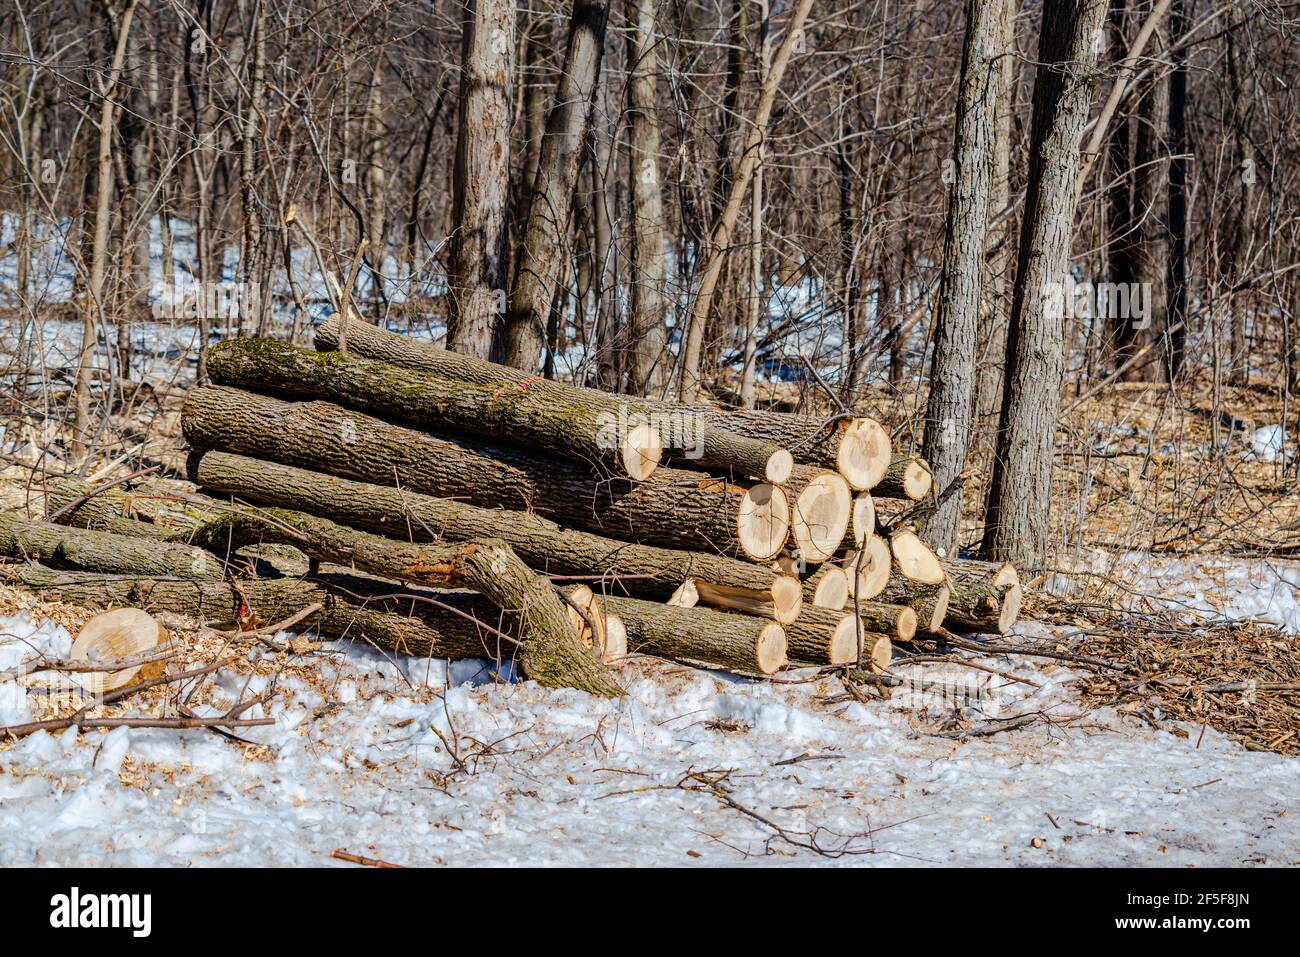 Ash trees have become Montreal’s 15-million-dollar-problem, emerald ash borer, a beetle that kills ash trees. Stock Photo